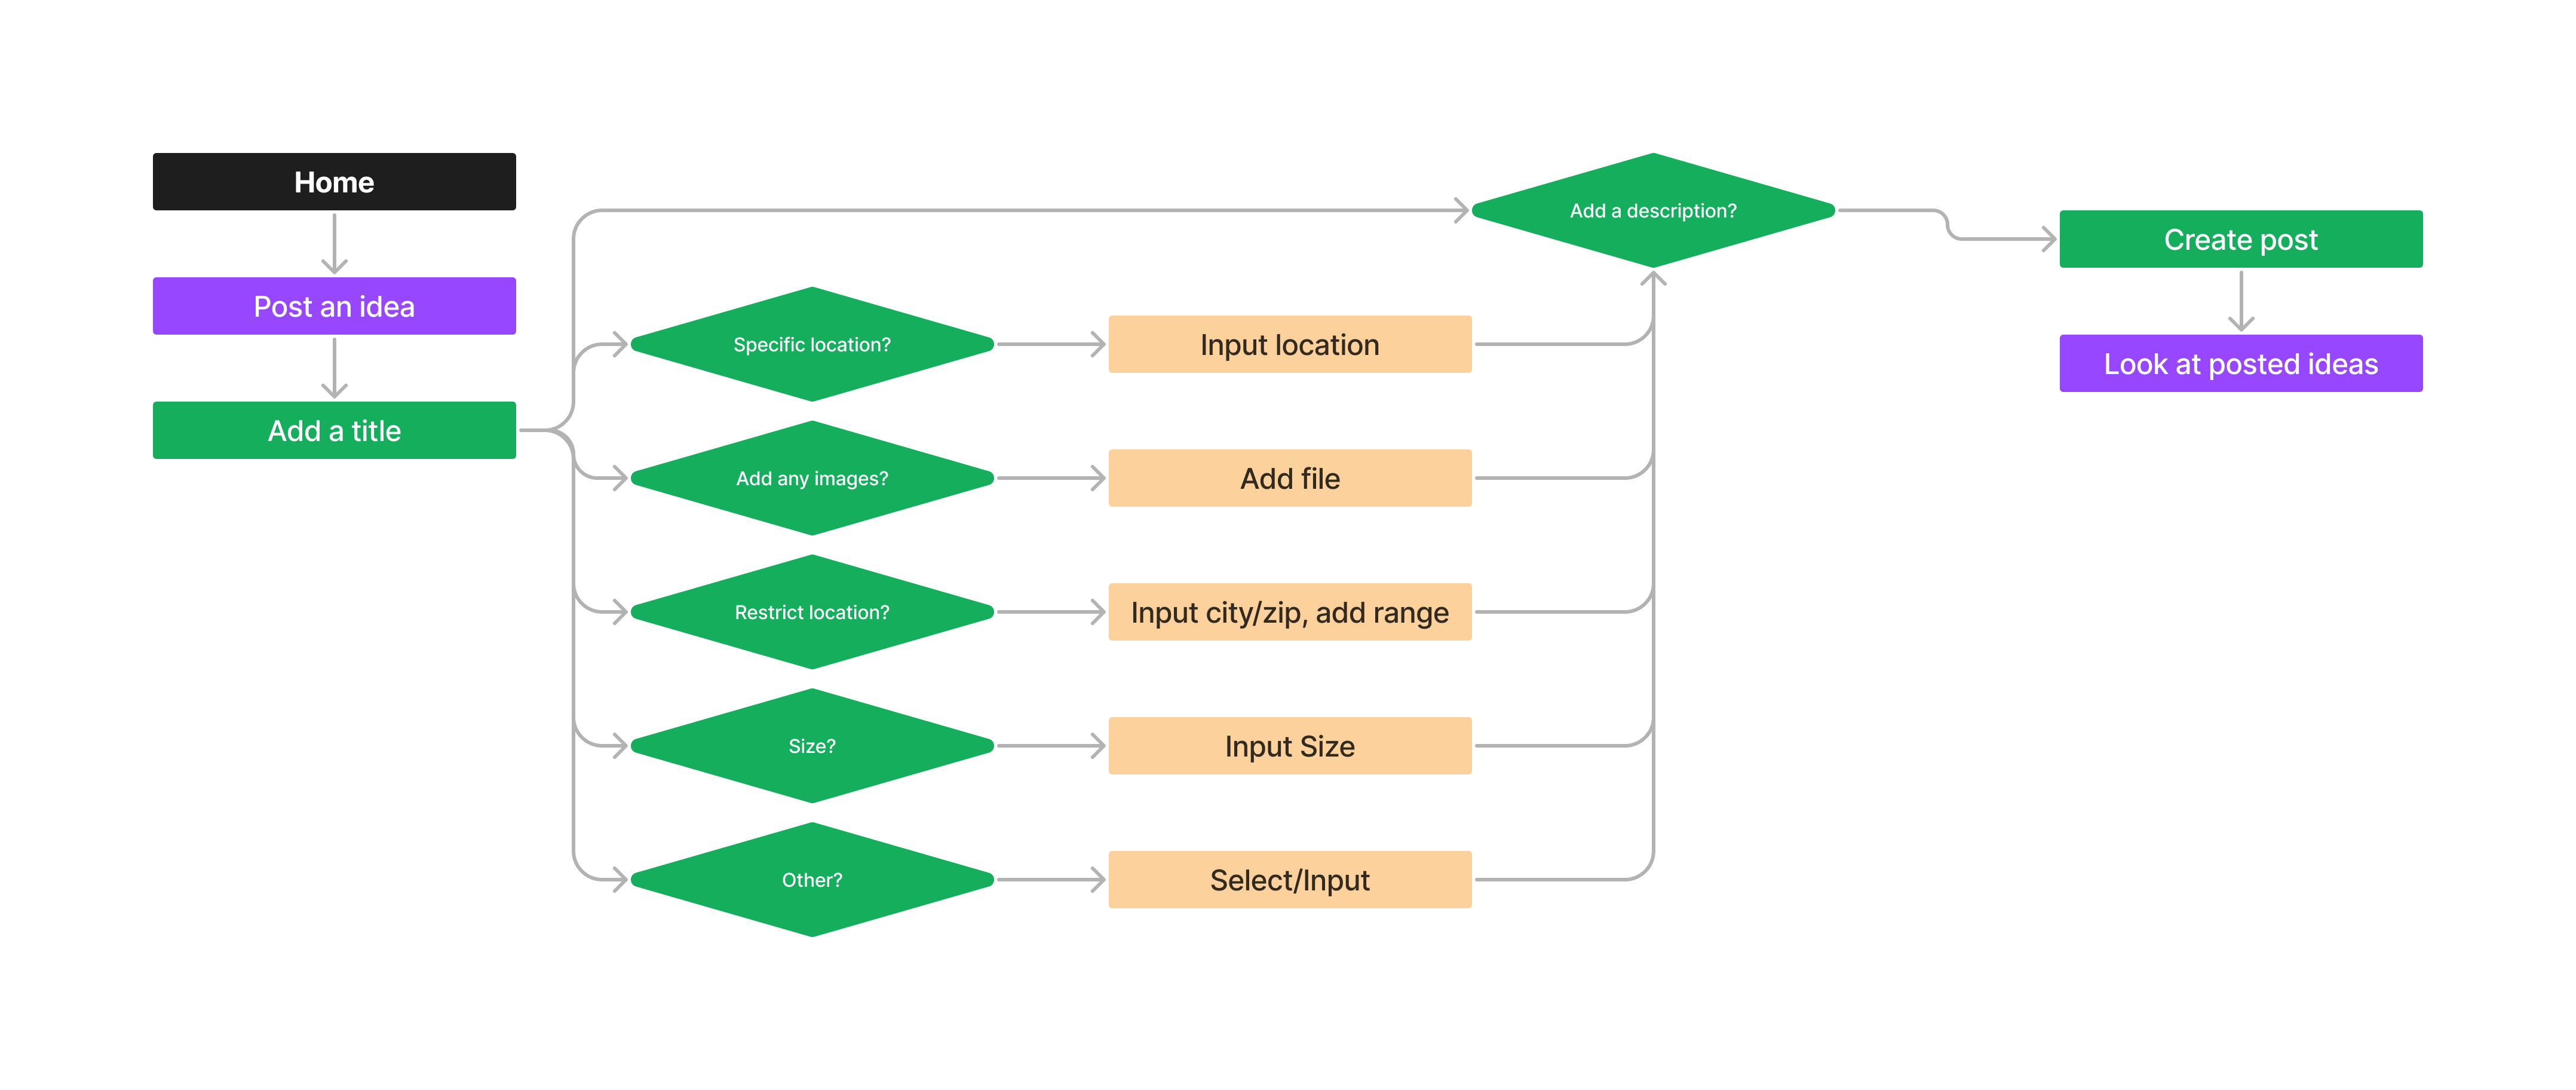 A large diagram showing the expected flow that a user will take through the sitemap to accomplish a certain task.